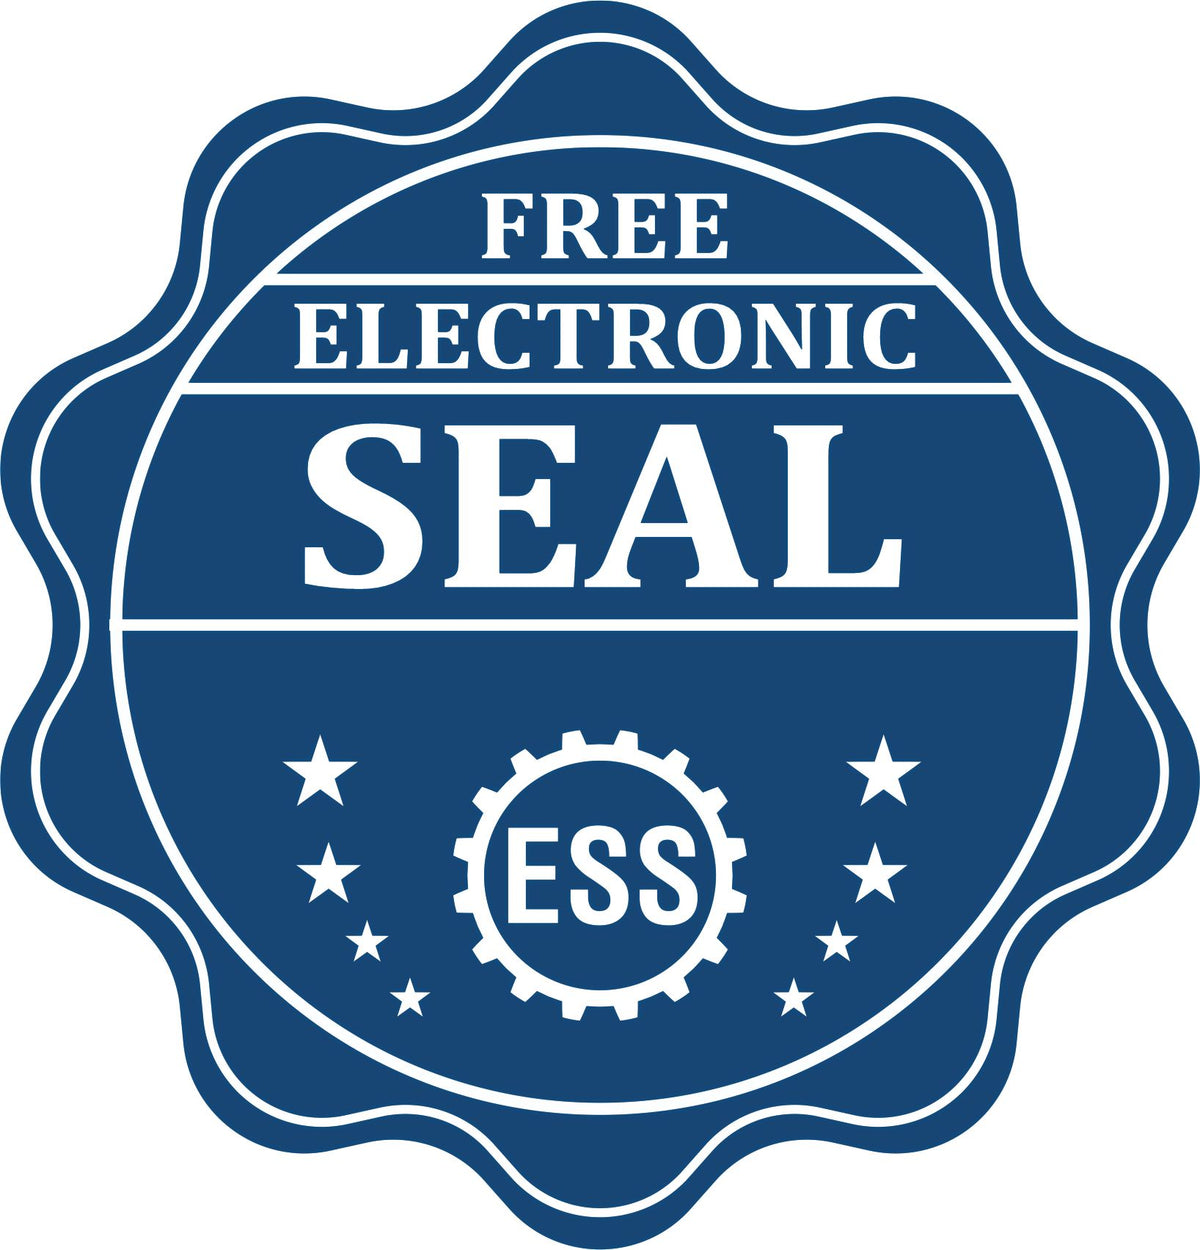 A badge showing a free electronic seal for the Vermont Desk Architect Embossing Seal with stars and the ESS gear on the emblem.